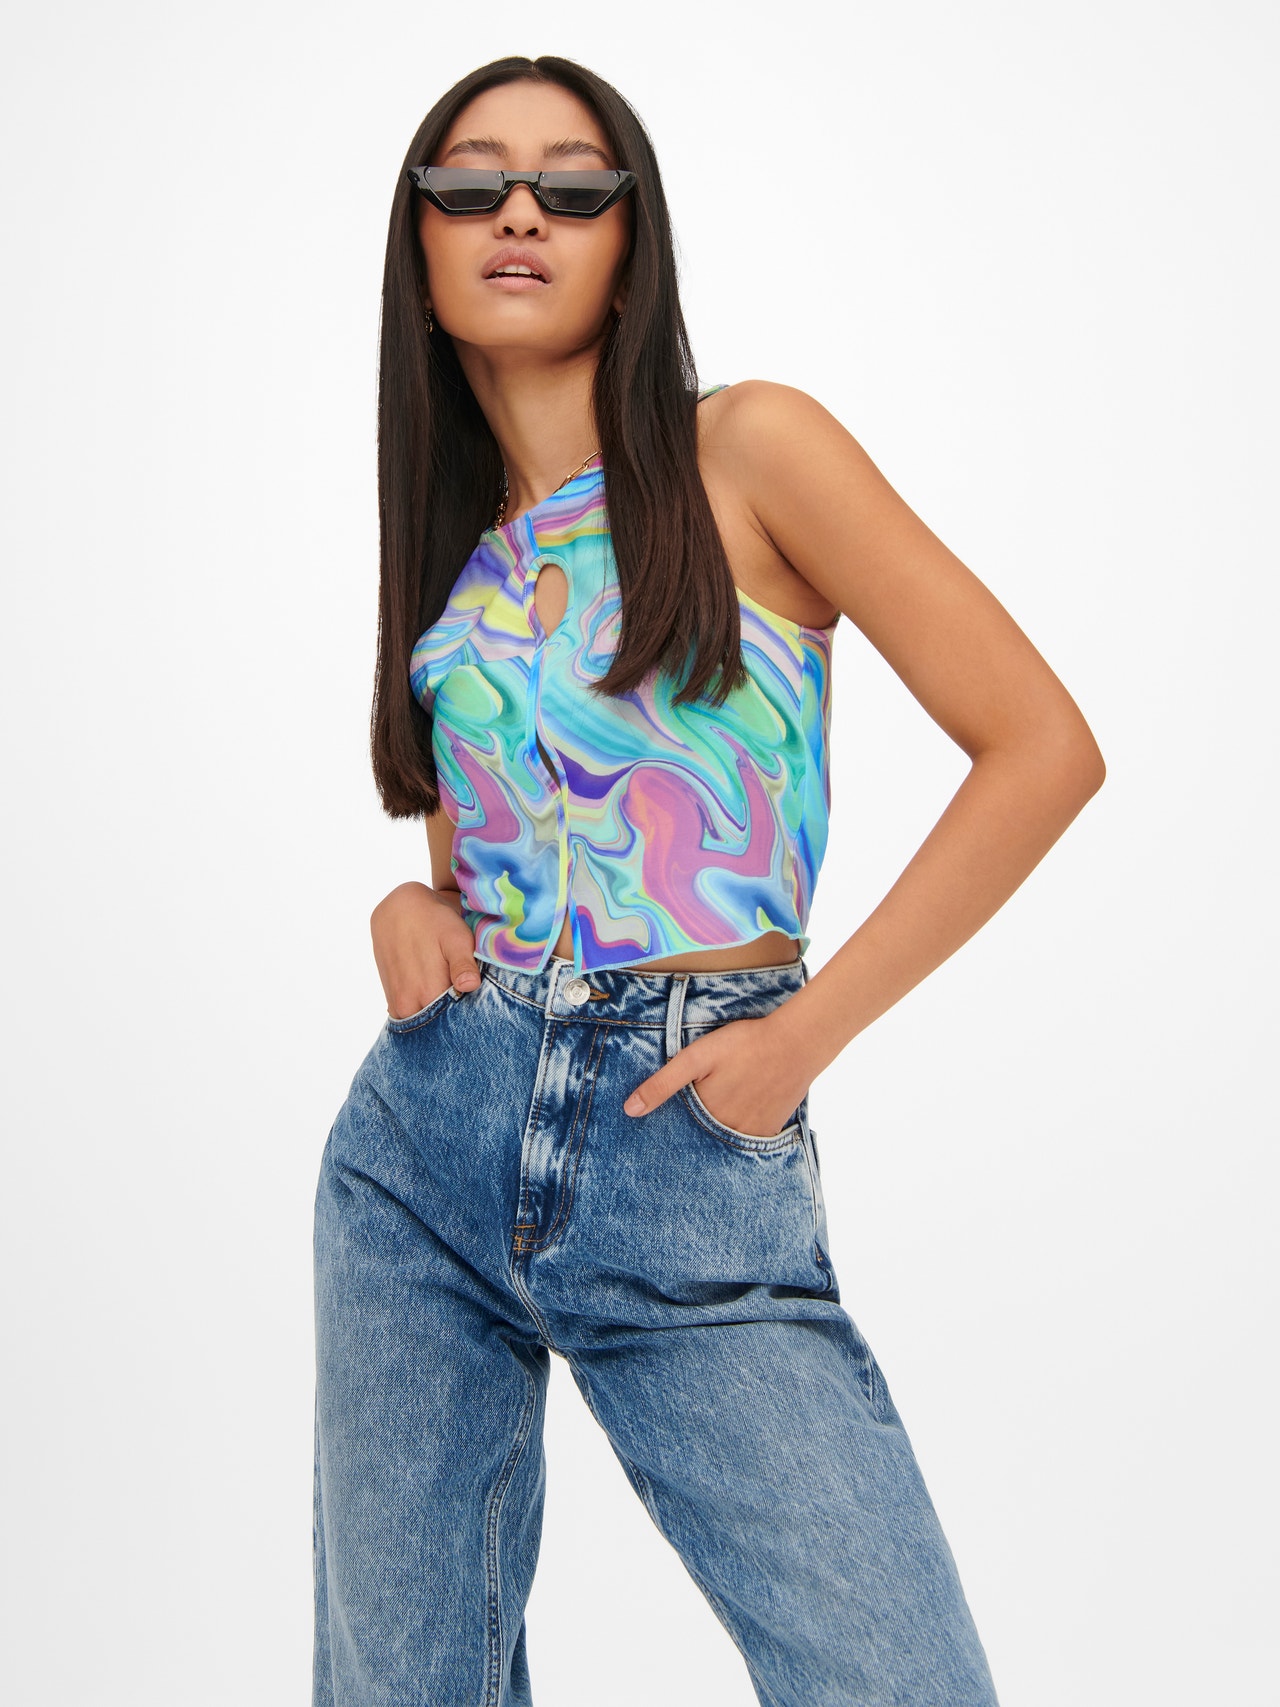 ONLY Cropped cut out Top -Aquarius - 15268541